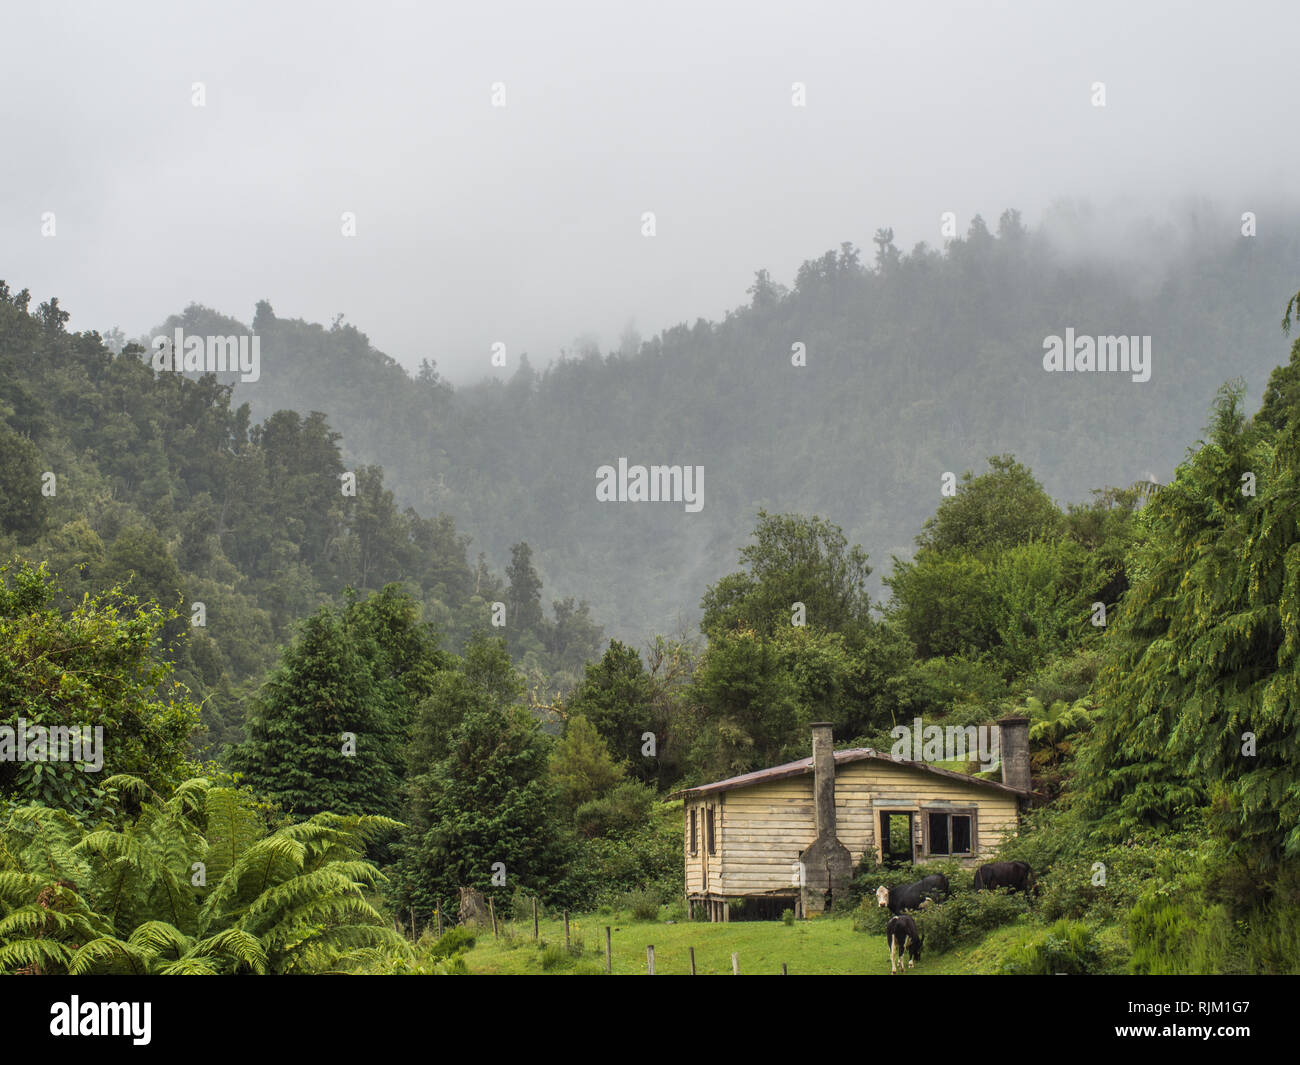 Cattle graze near abandoned house, among misty forest hills. Elsdon Best lived in a house at this site. Heipipi, Highway 38, Te Urewera, New Zealand Stock Photo